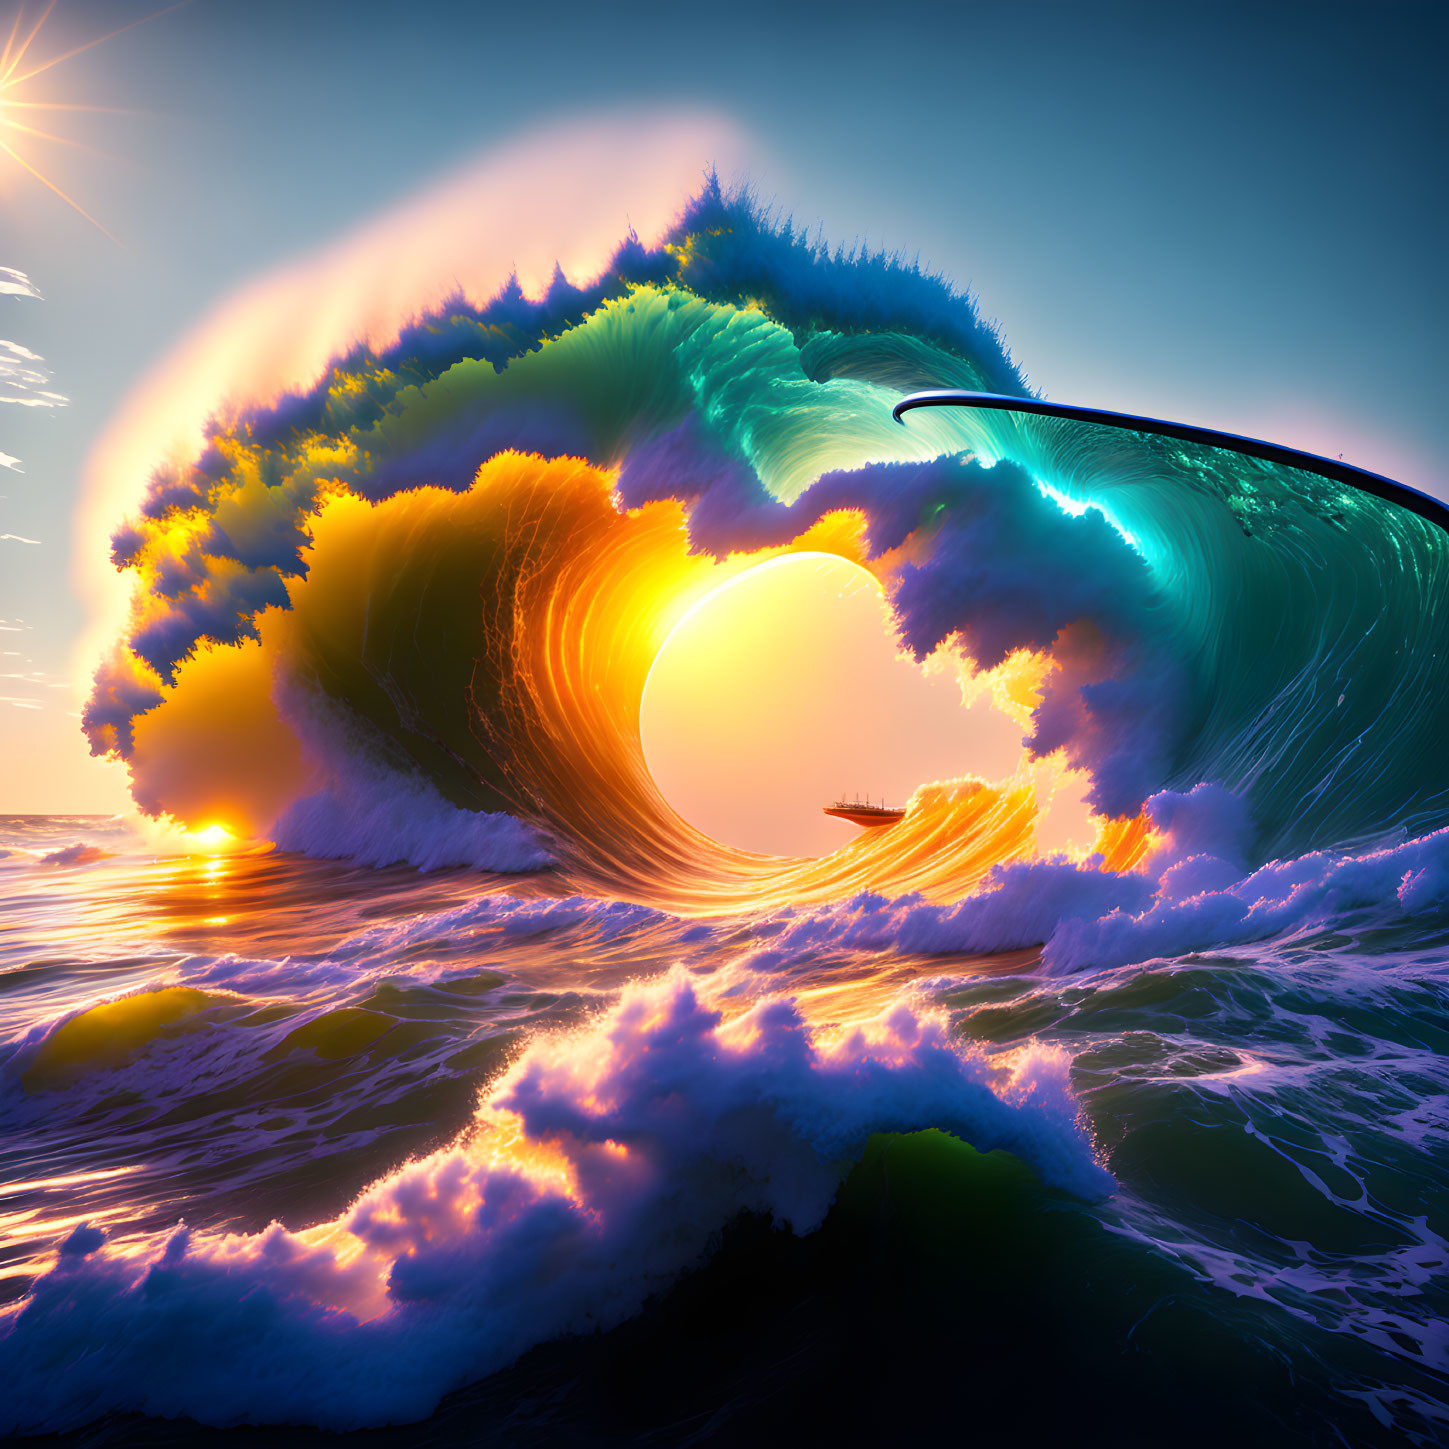 Colorful Ocean Wave Sunset Artwork: Dramatic Curling Wave with Vibrant Sunset Colors